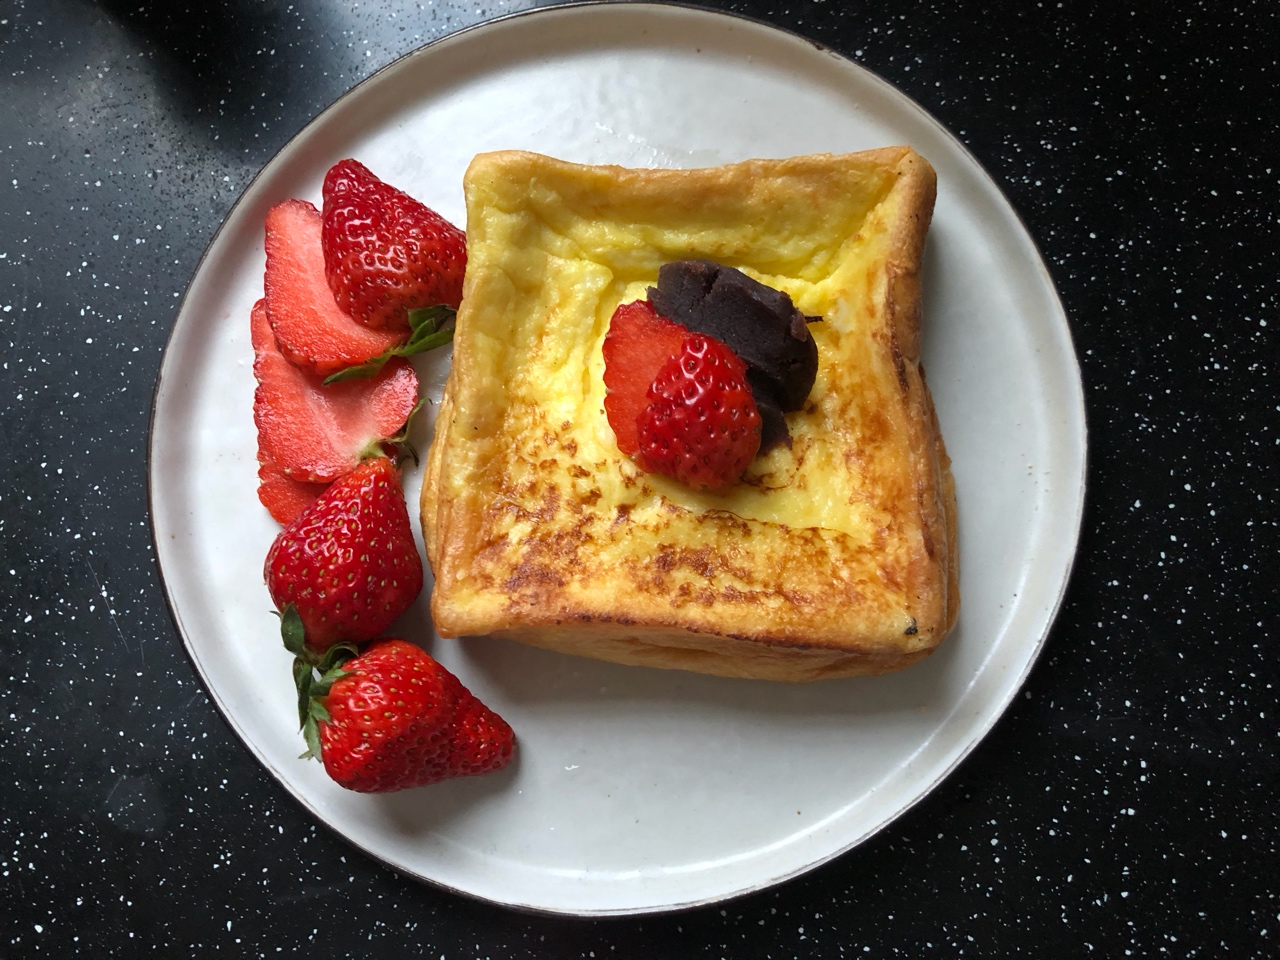 Classic French Toast  经典法式吐司